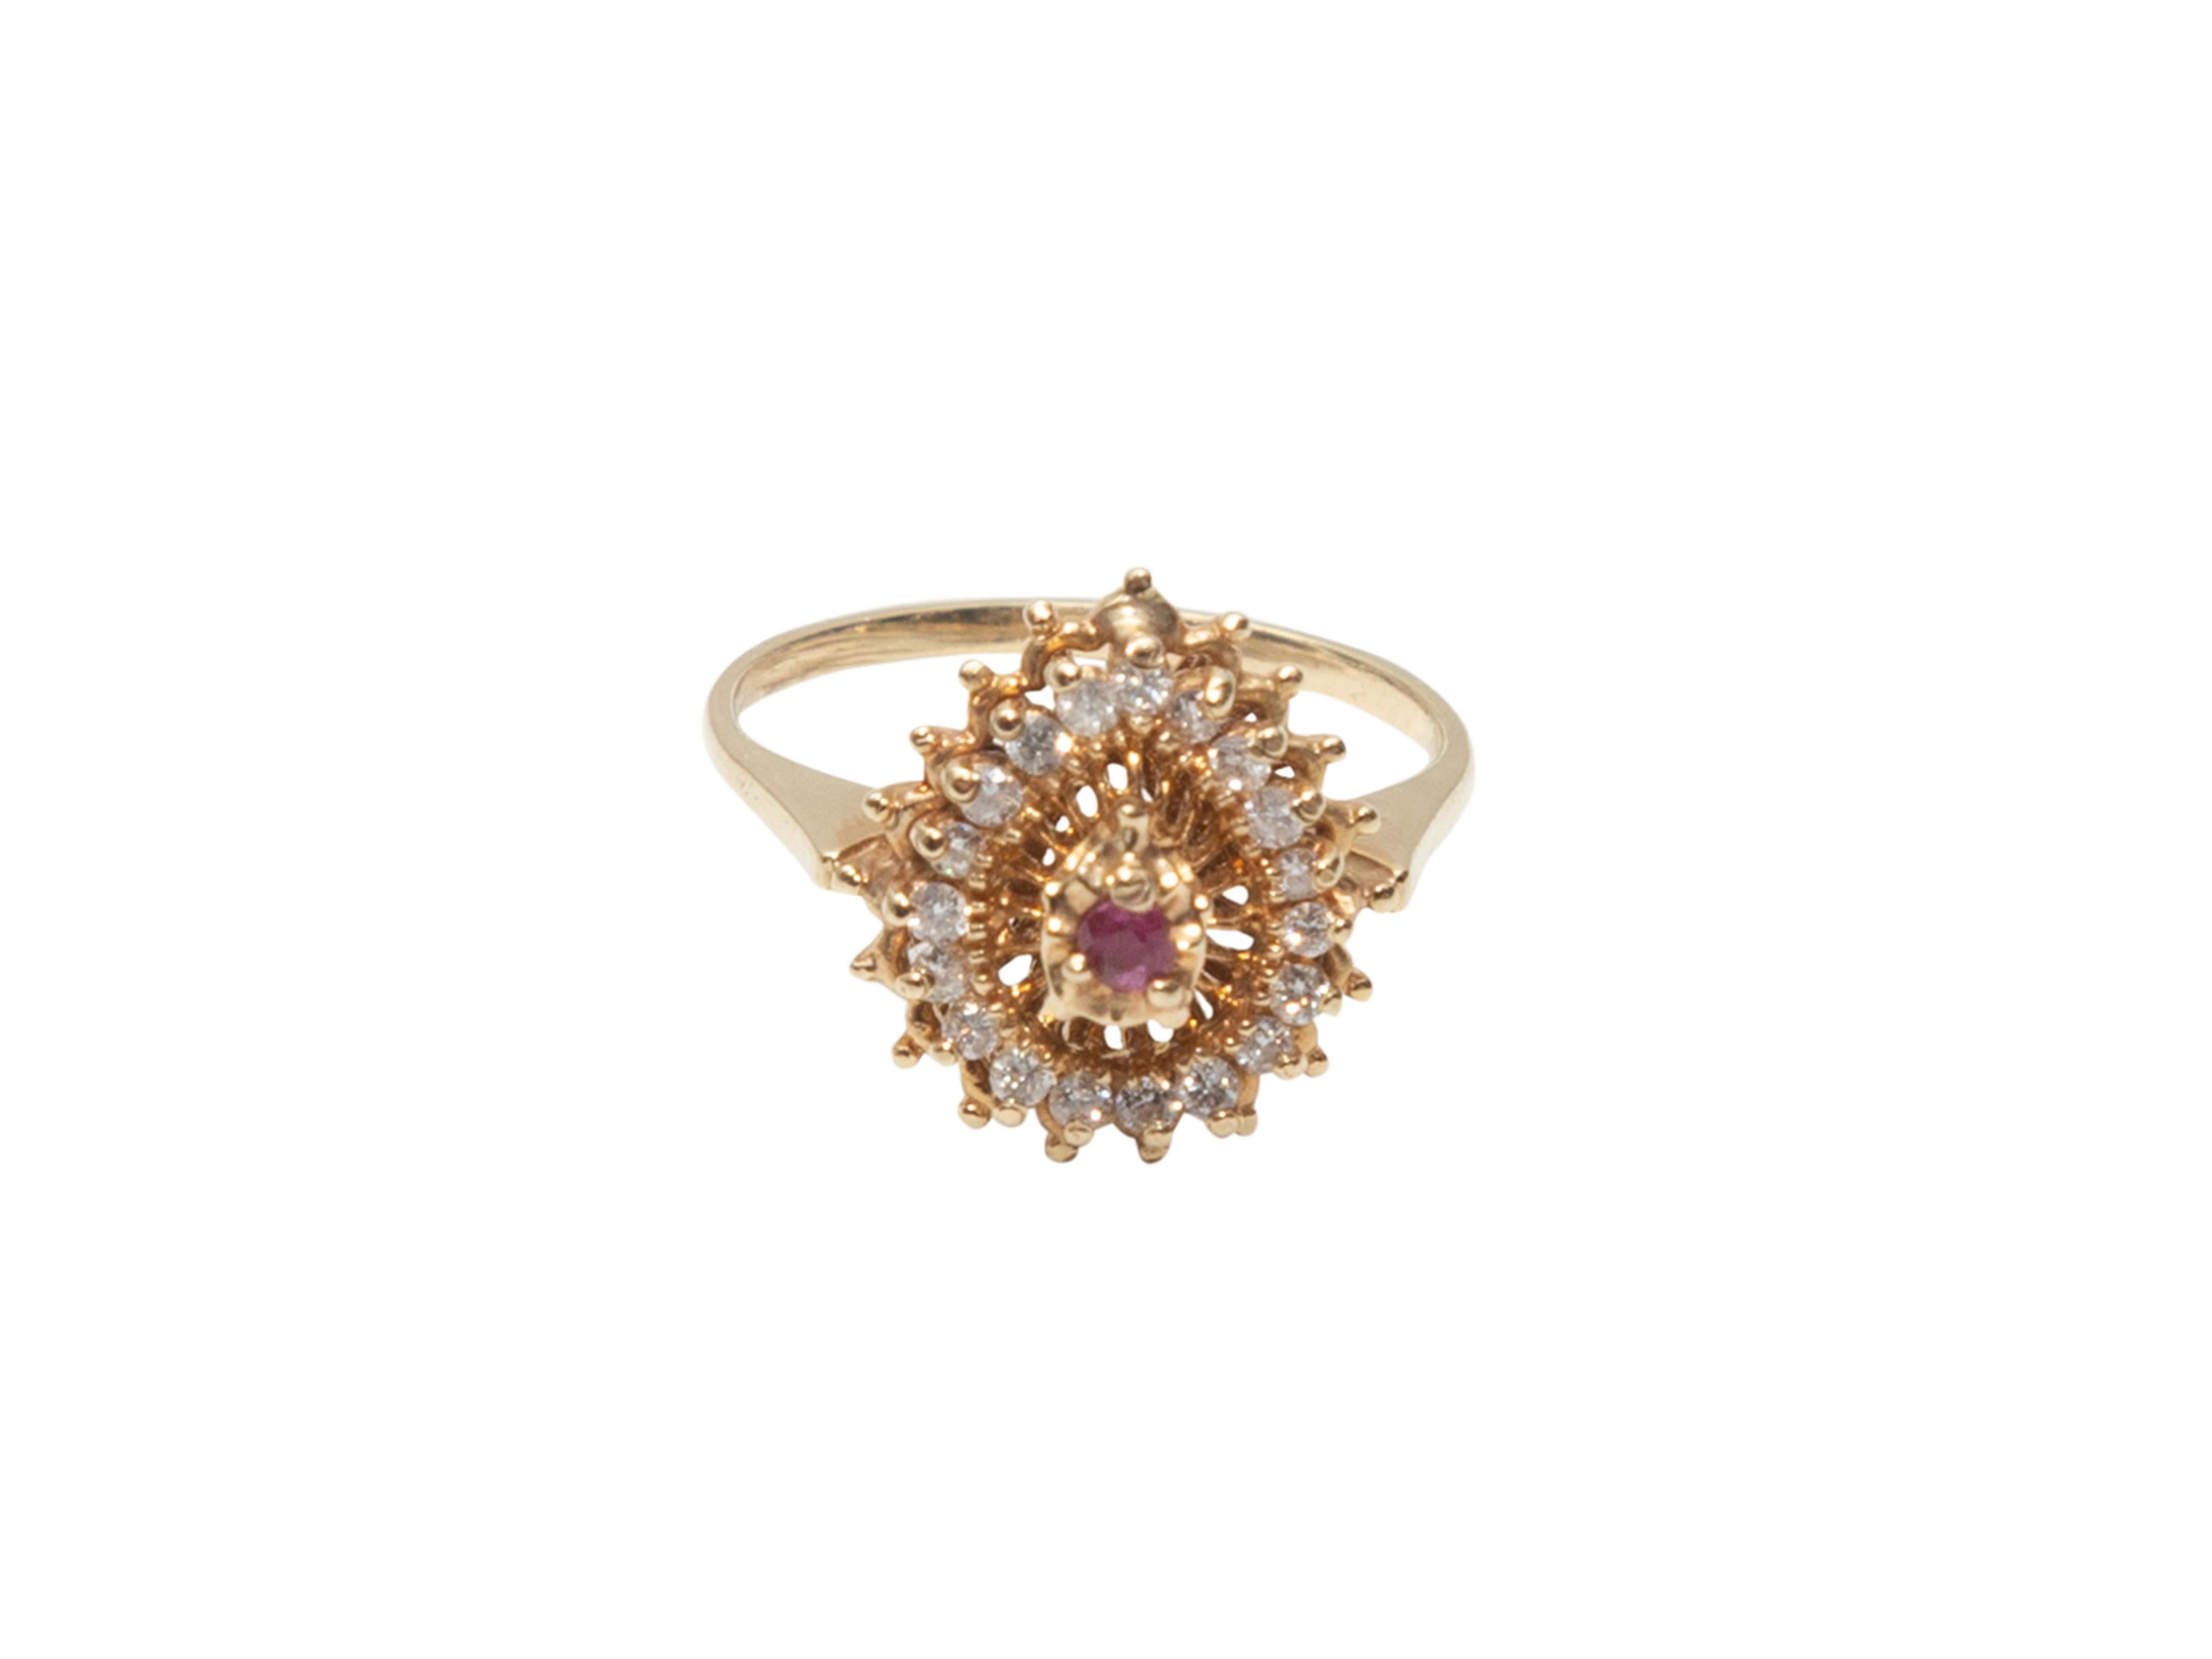 Product details: 14K gold, diamond, and ruby cluster pinky ring. 0.5